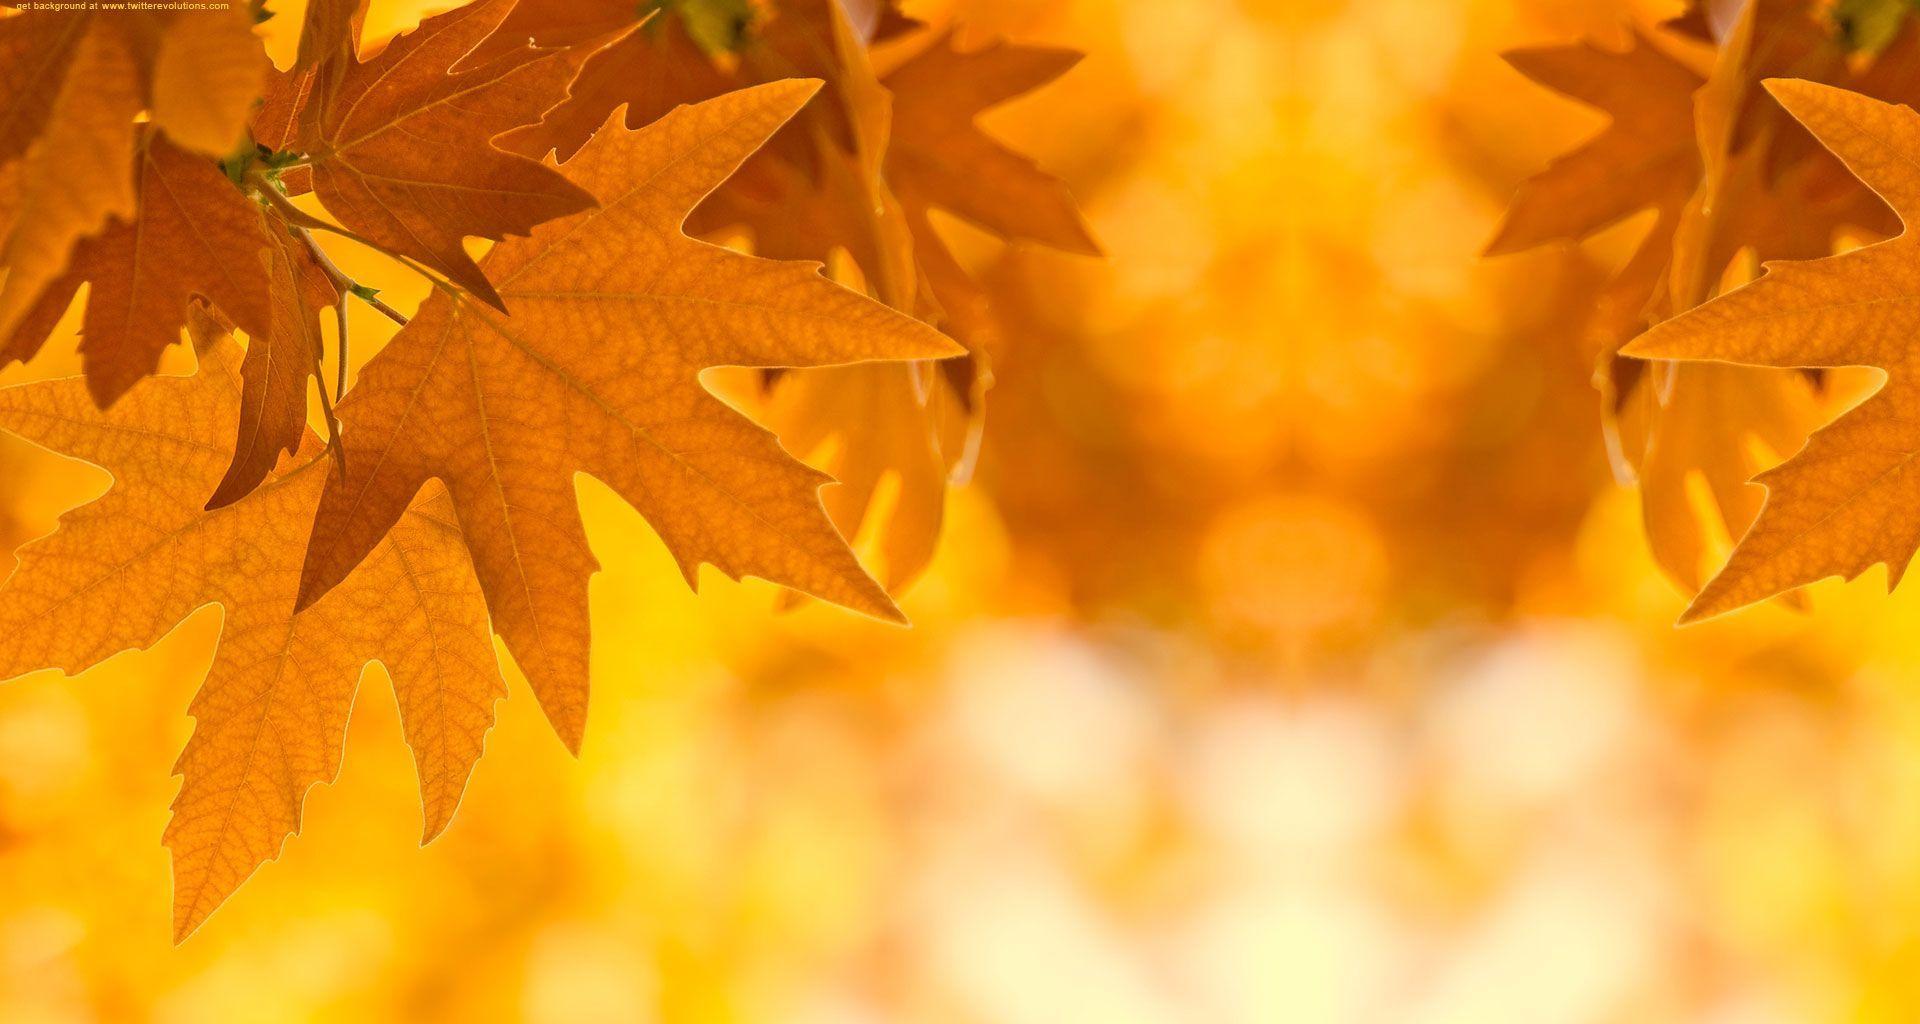 Autumn leaves Twitter background. Twitter background